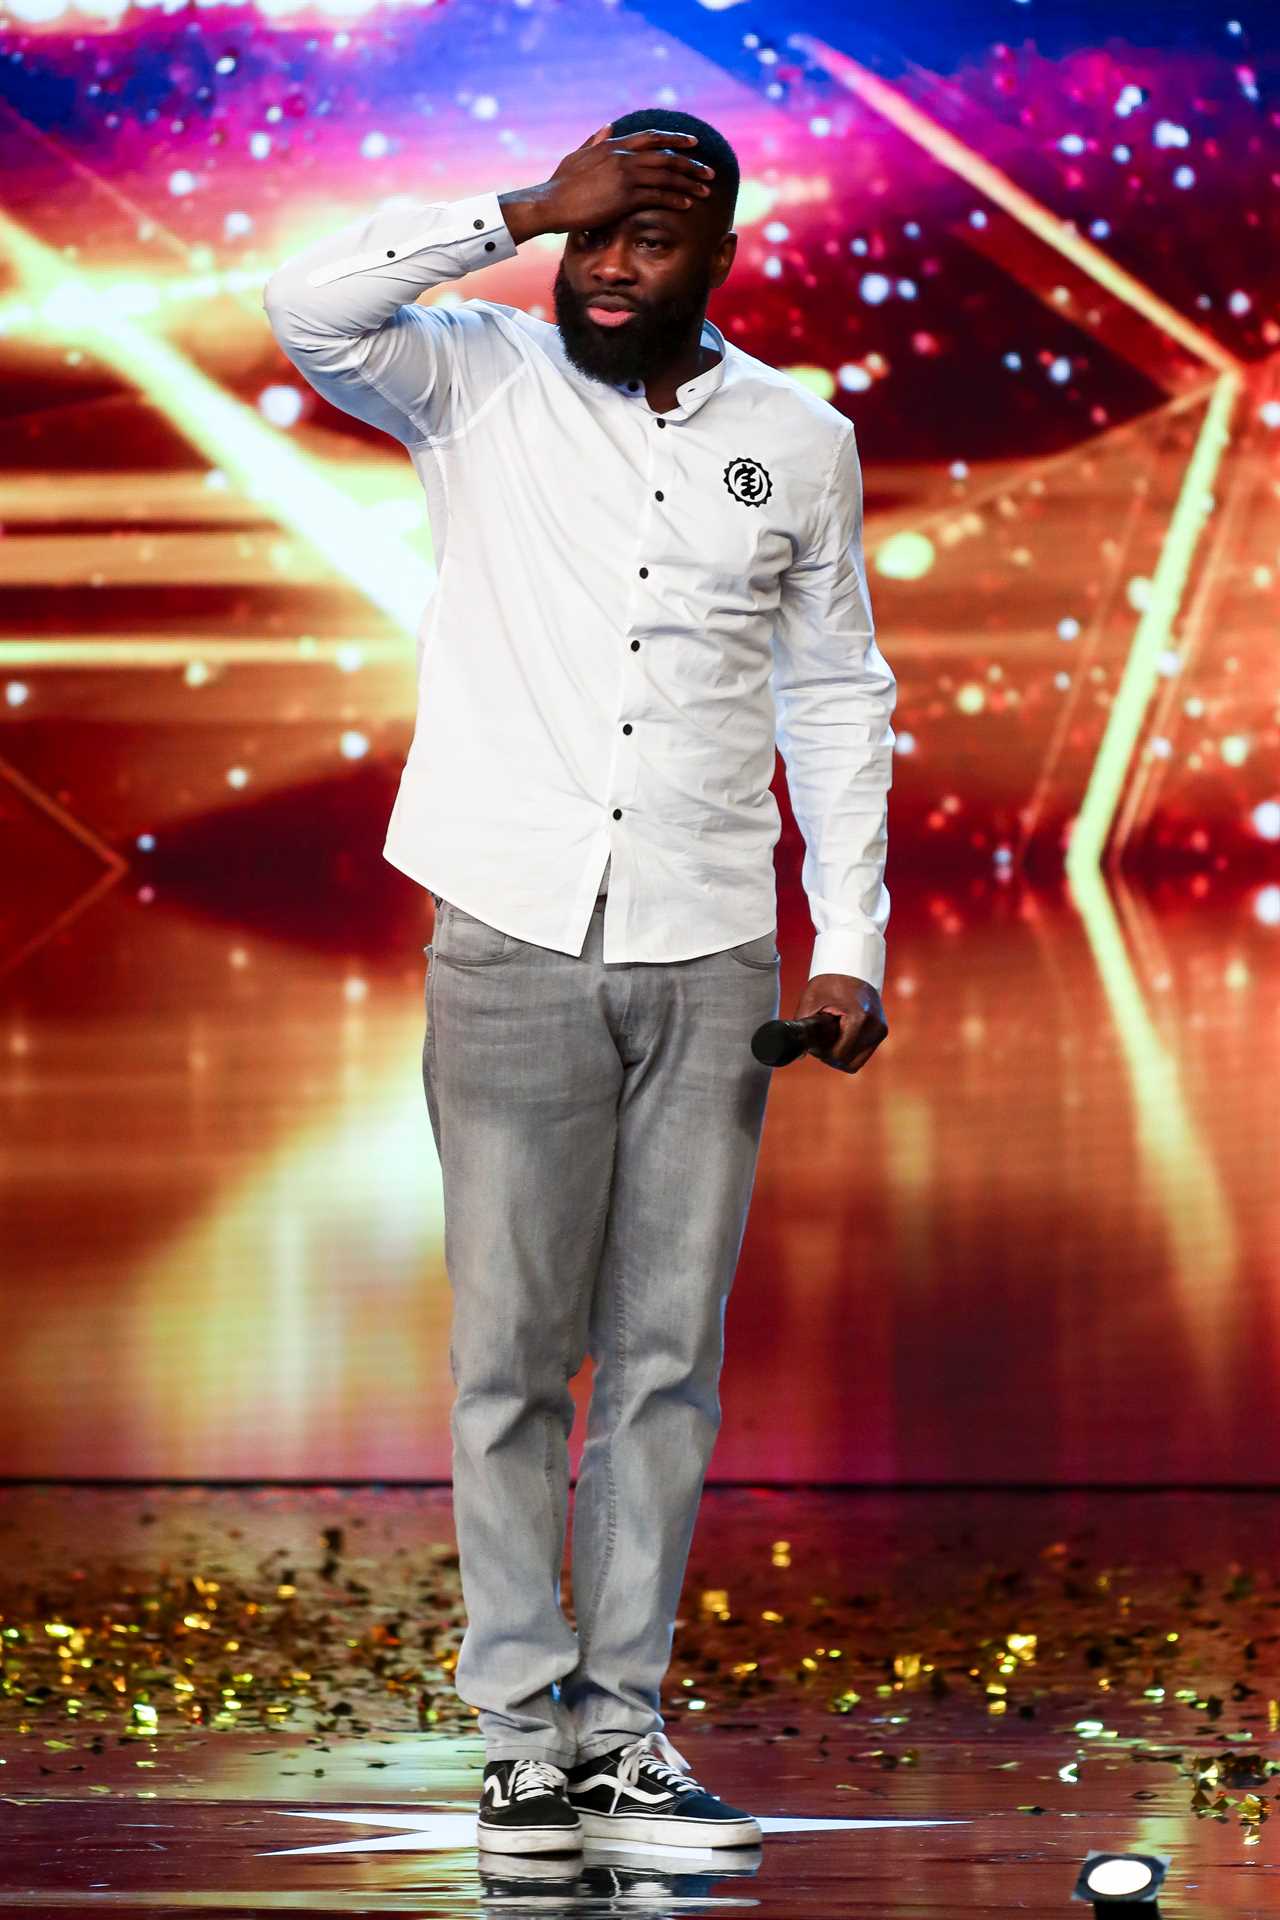 Britain’s Got Talent star Kojo Anim reveals Kevin Hart saved his career during crippling depression and anxiety after 20-year struggle for fame